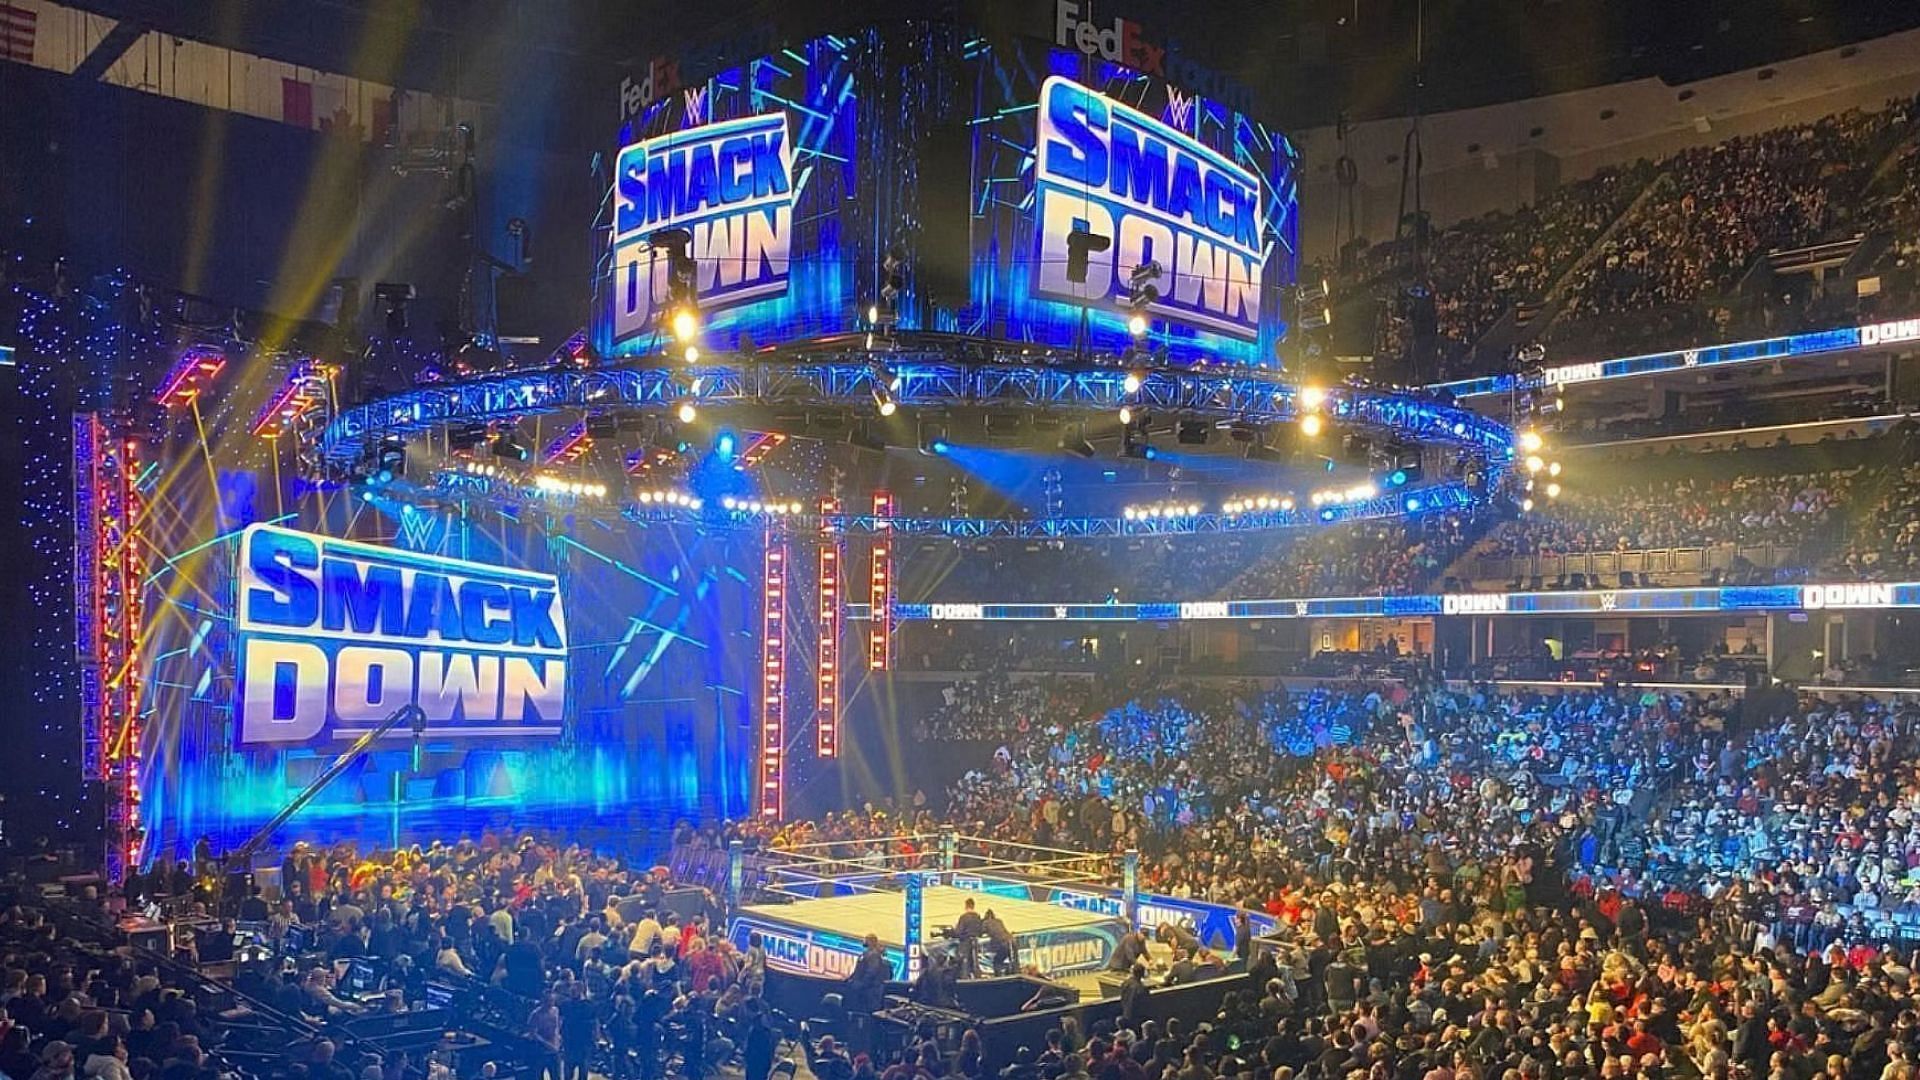 SmackDown will take place in Evansville this week.